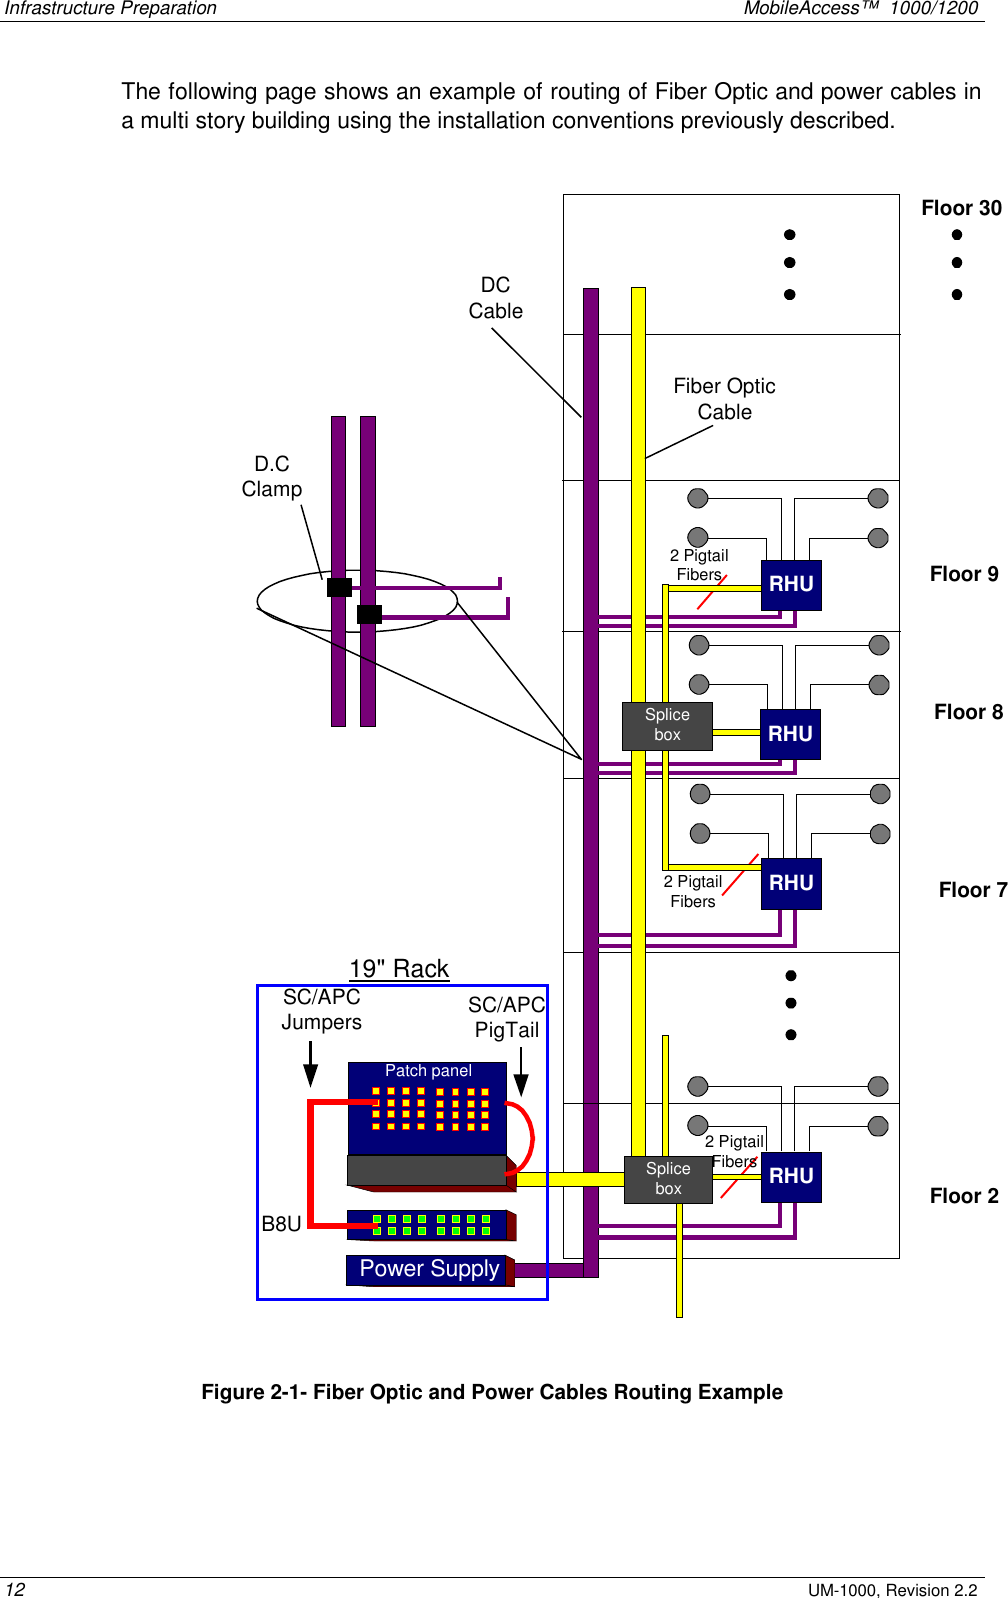 Infrastructure Preparation    MobileAccess™  1000/1200 12 UM-1000, Revision 2.2 The following page shows an example of routing of Fiber Optic and power cables in a multi story building using the installation conventions previously described.   Floor 9Floor 2RHU2 PigtailFibersFiber OpticCableFloor 72 PigtailFibersPatch panelB8USC/APCPigTailSC/APCJumpersSpliceboxRHURHURHU19&quot; RackPower SupplyDCCableSpliceboxFloor 30Floor 8D.CClamp2 PigtailFibers Figure  2-1- Fiber Optic and Power Cables Routing Example 